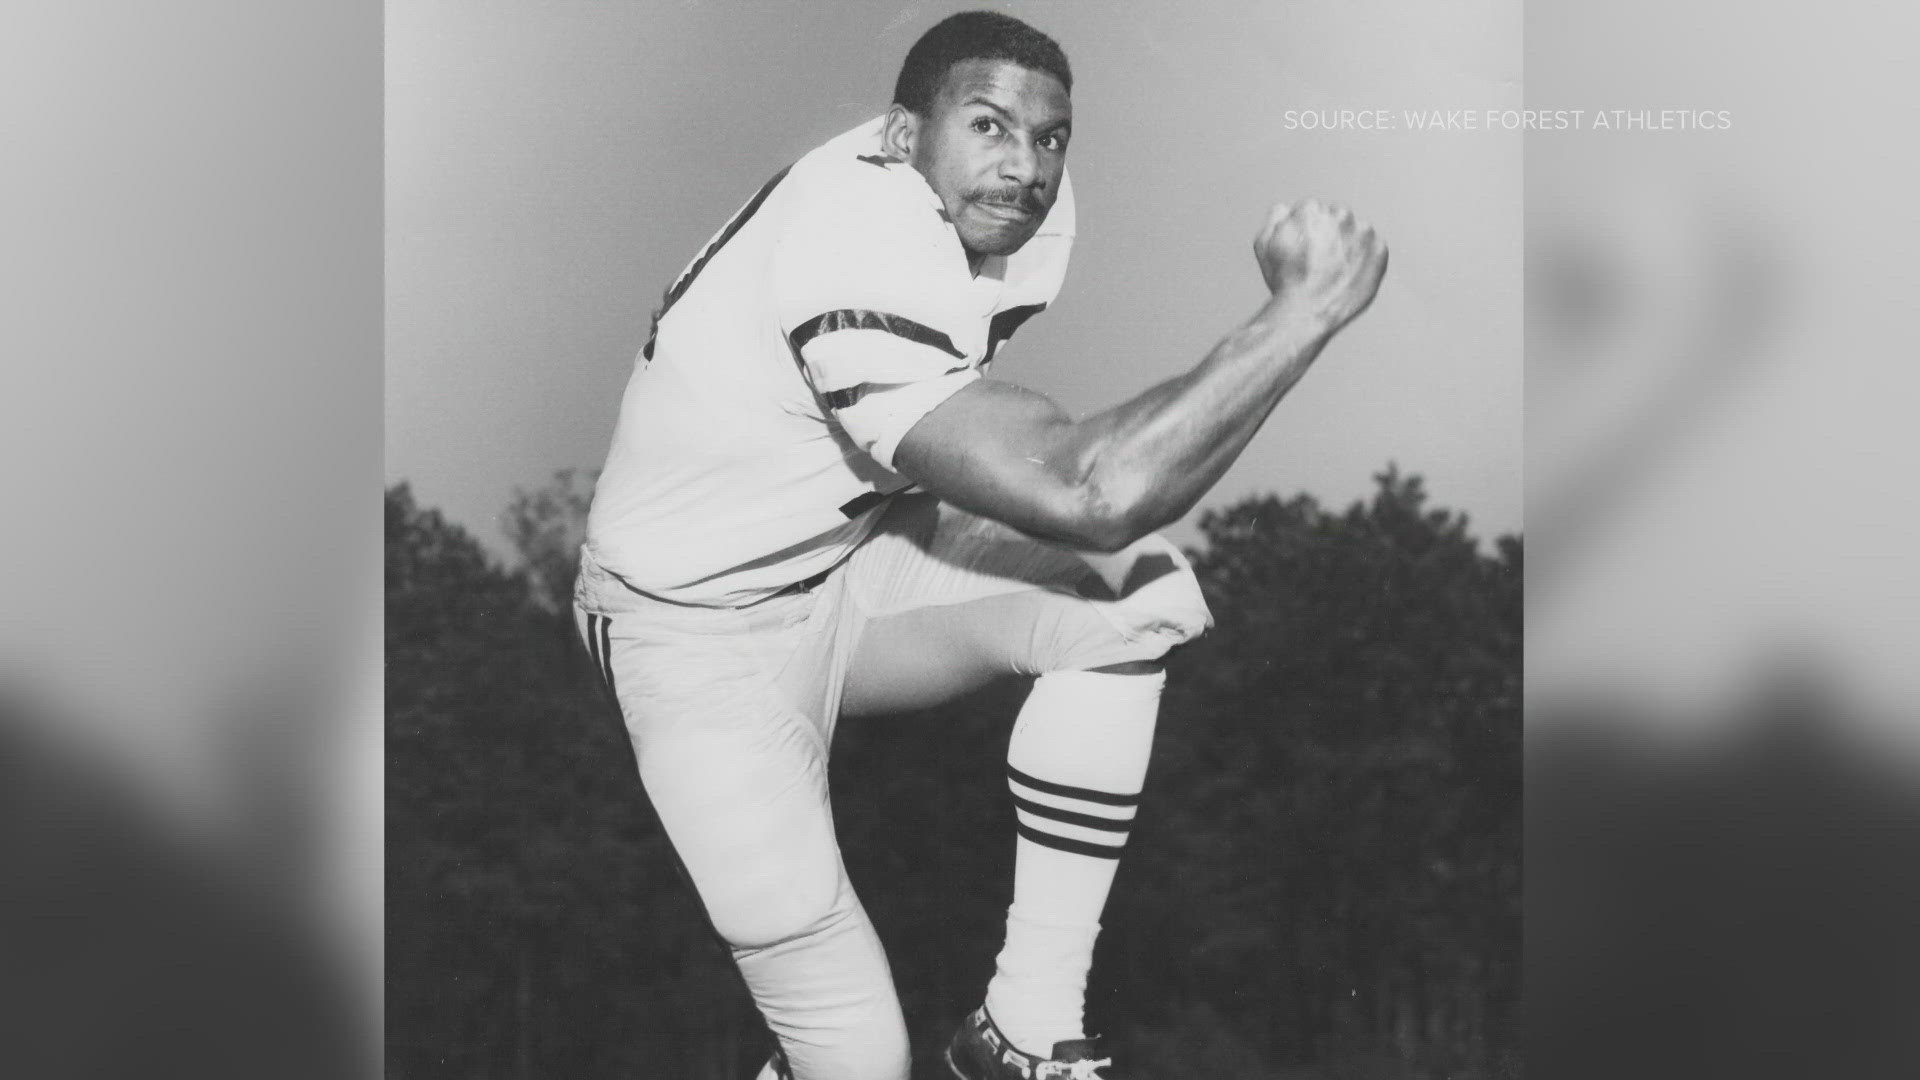 Wake Forest community mourns loss of hall of famer Bob Grant.